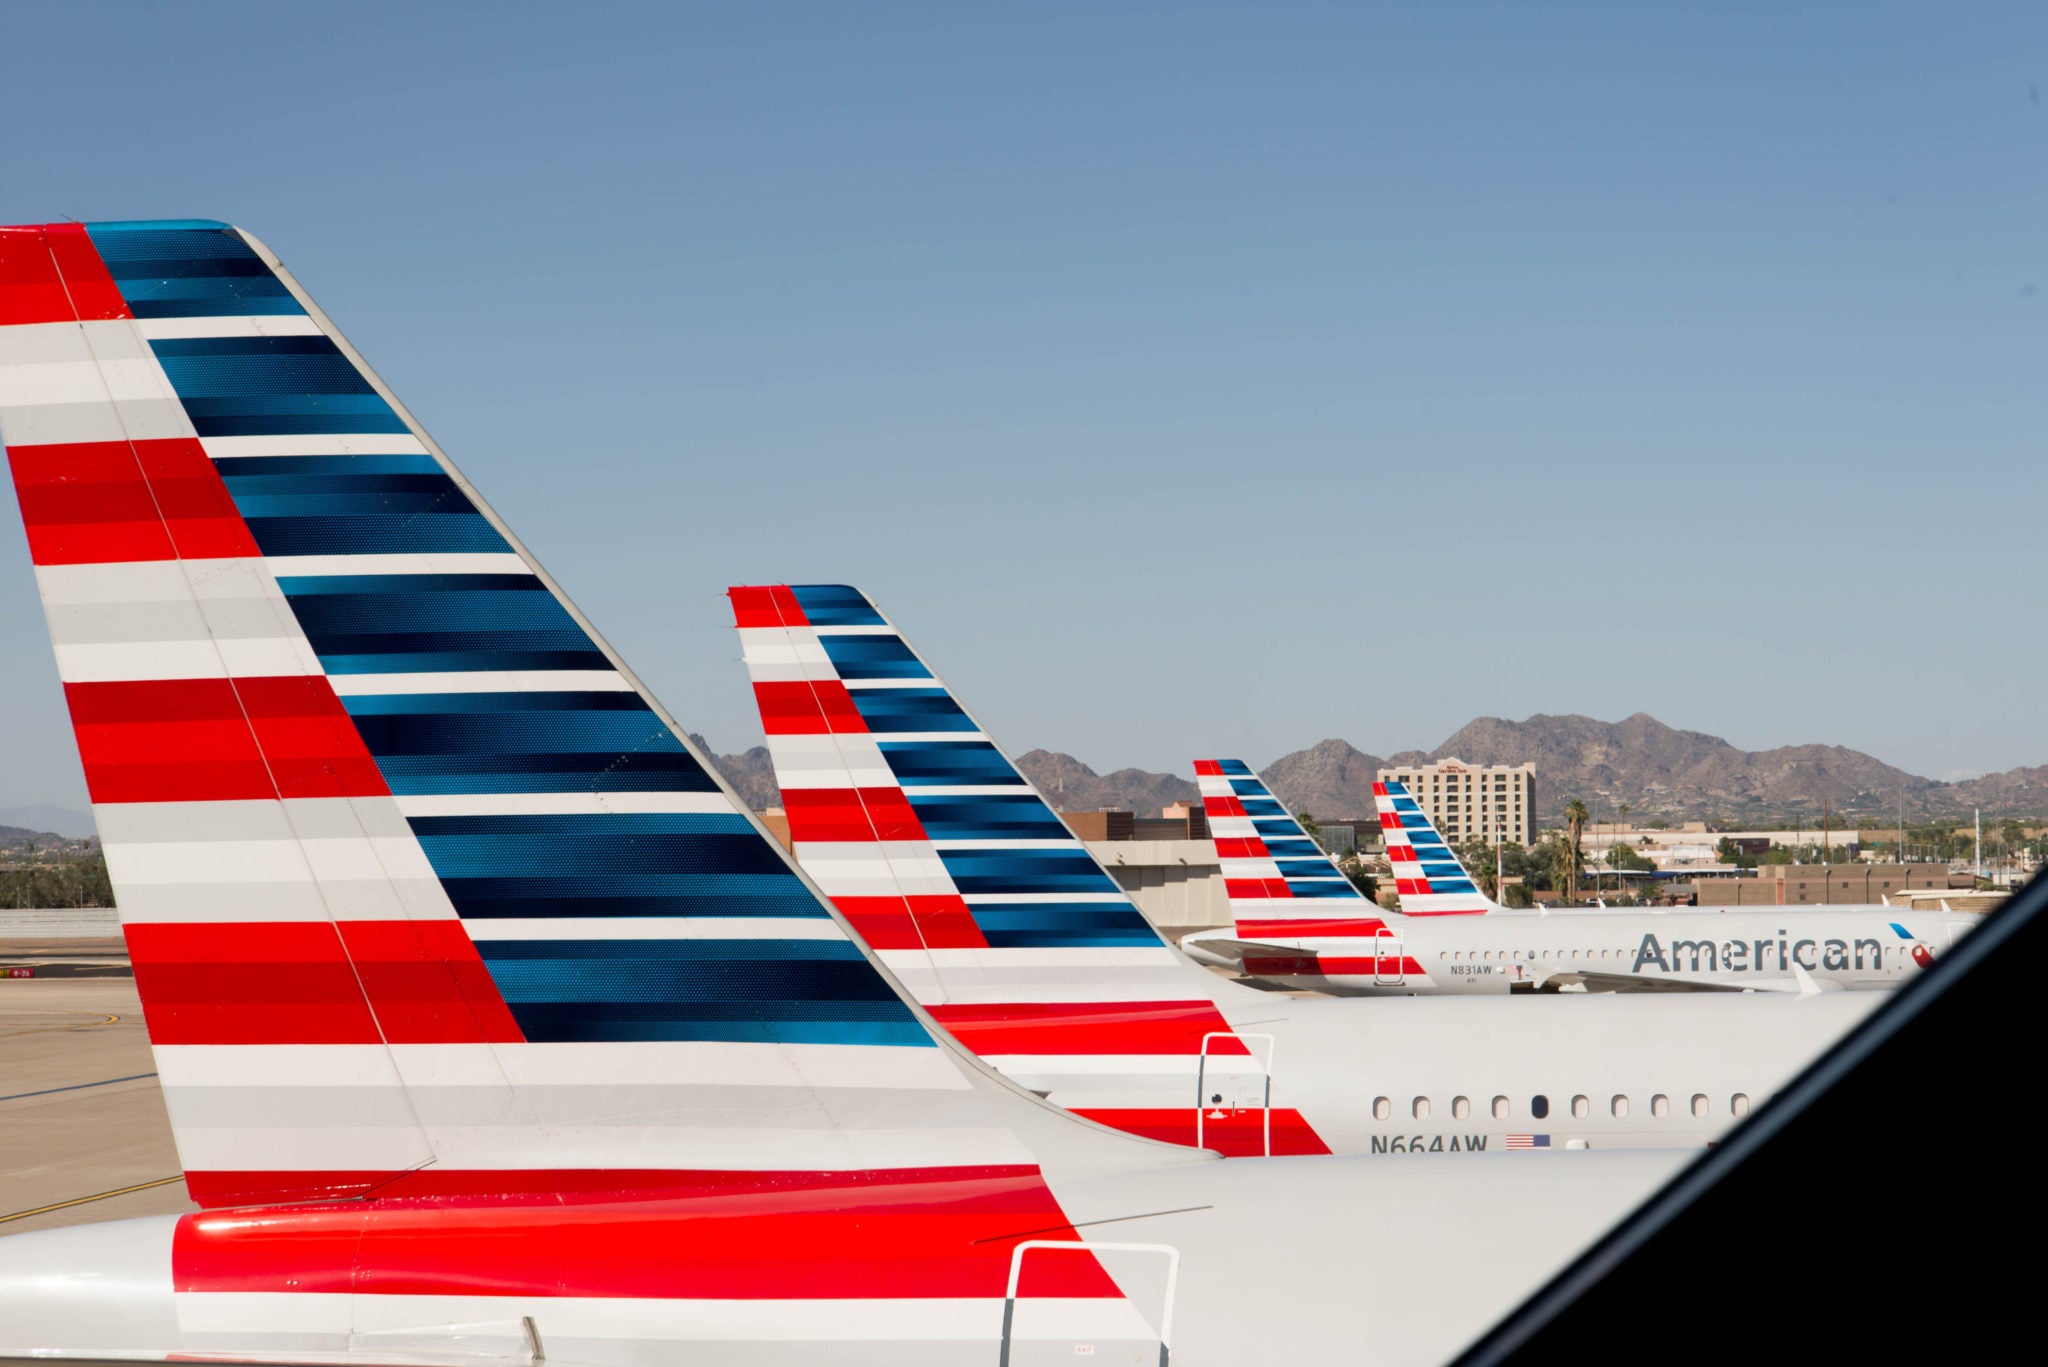 American Airlines Planes At Gate